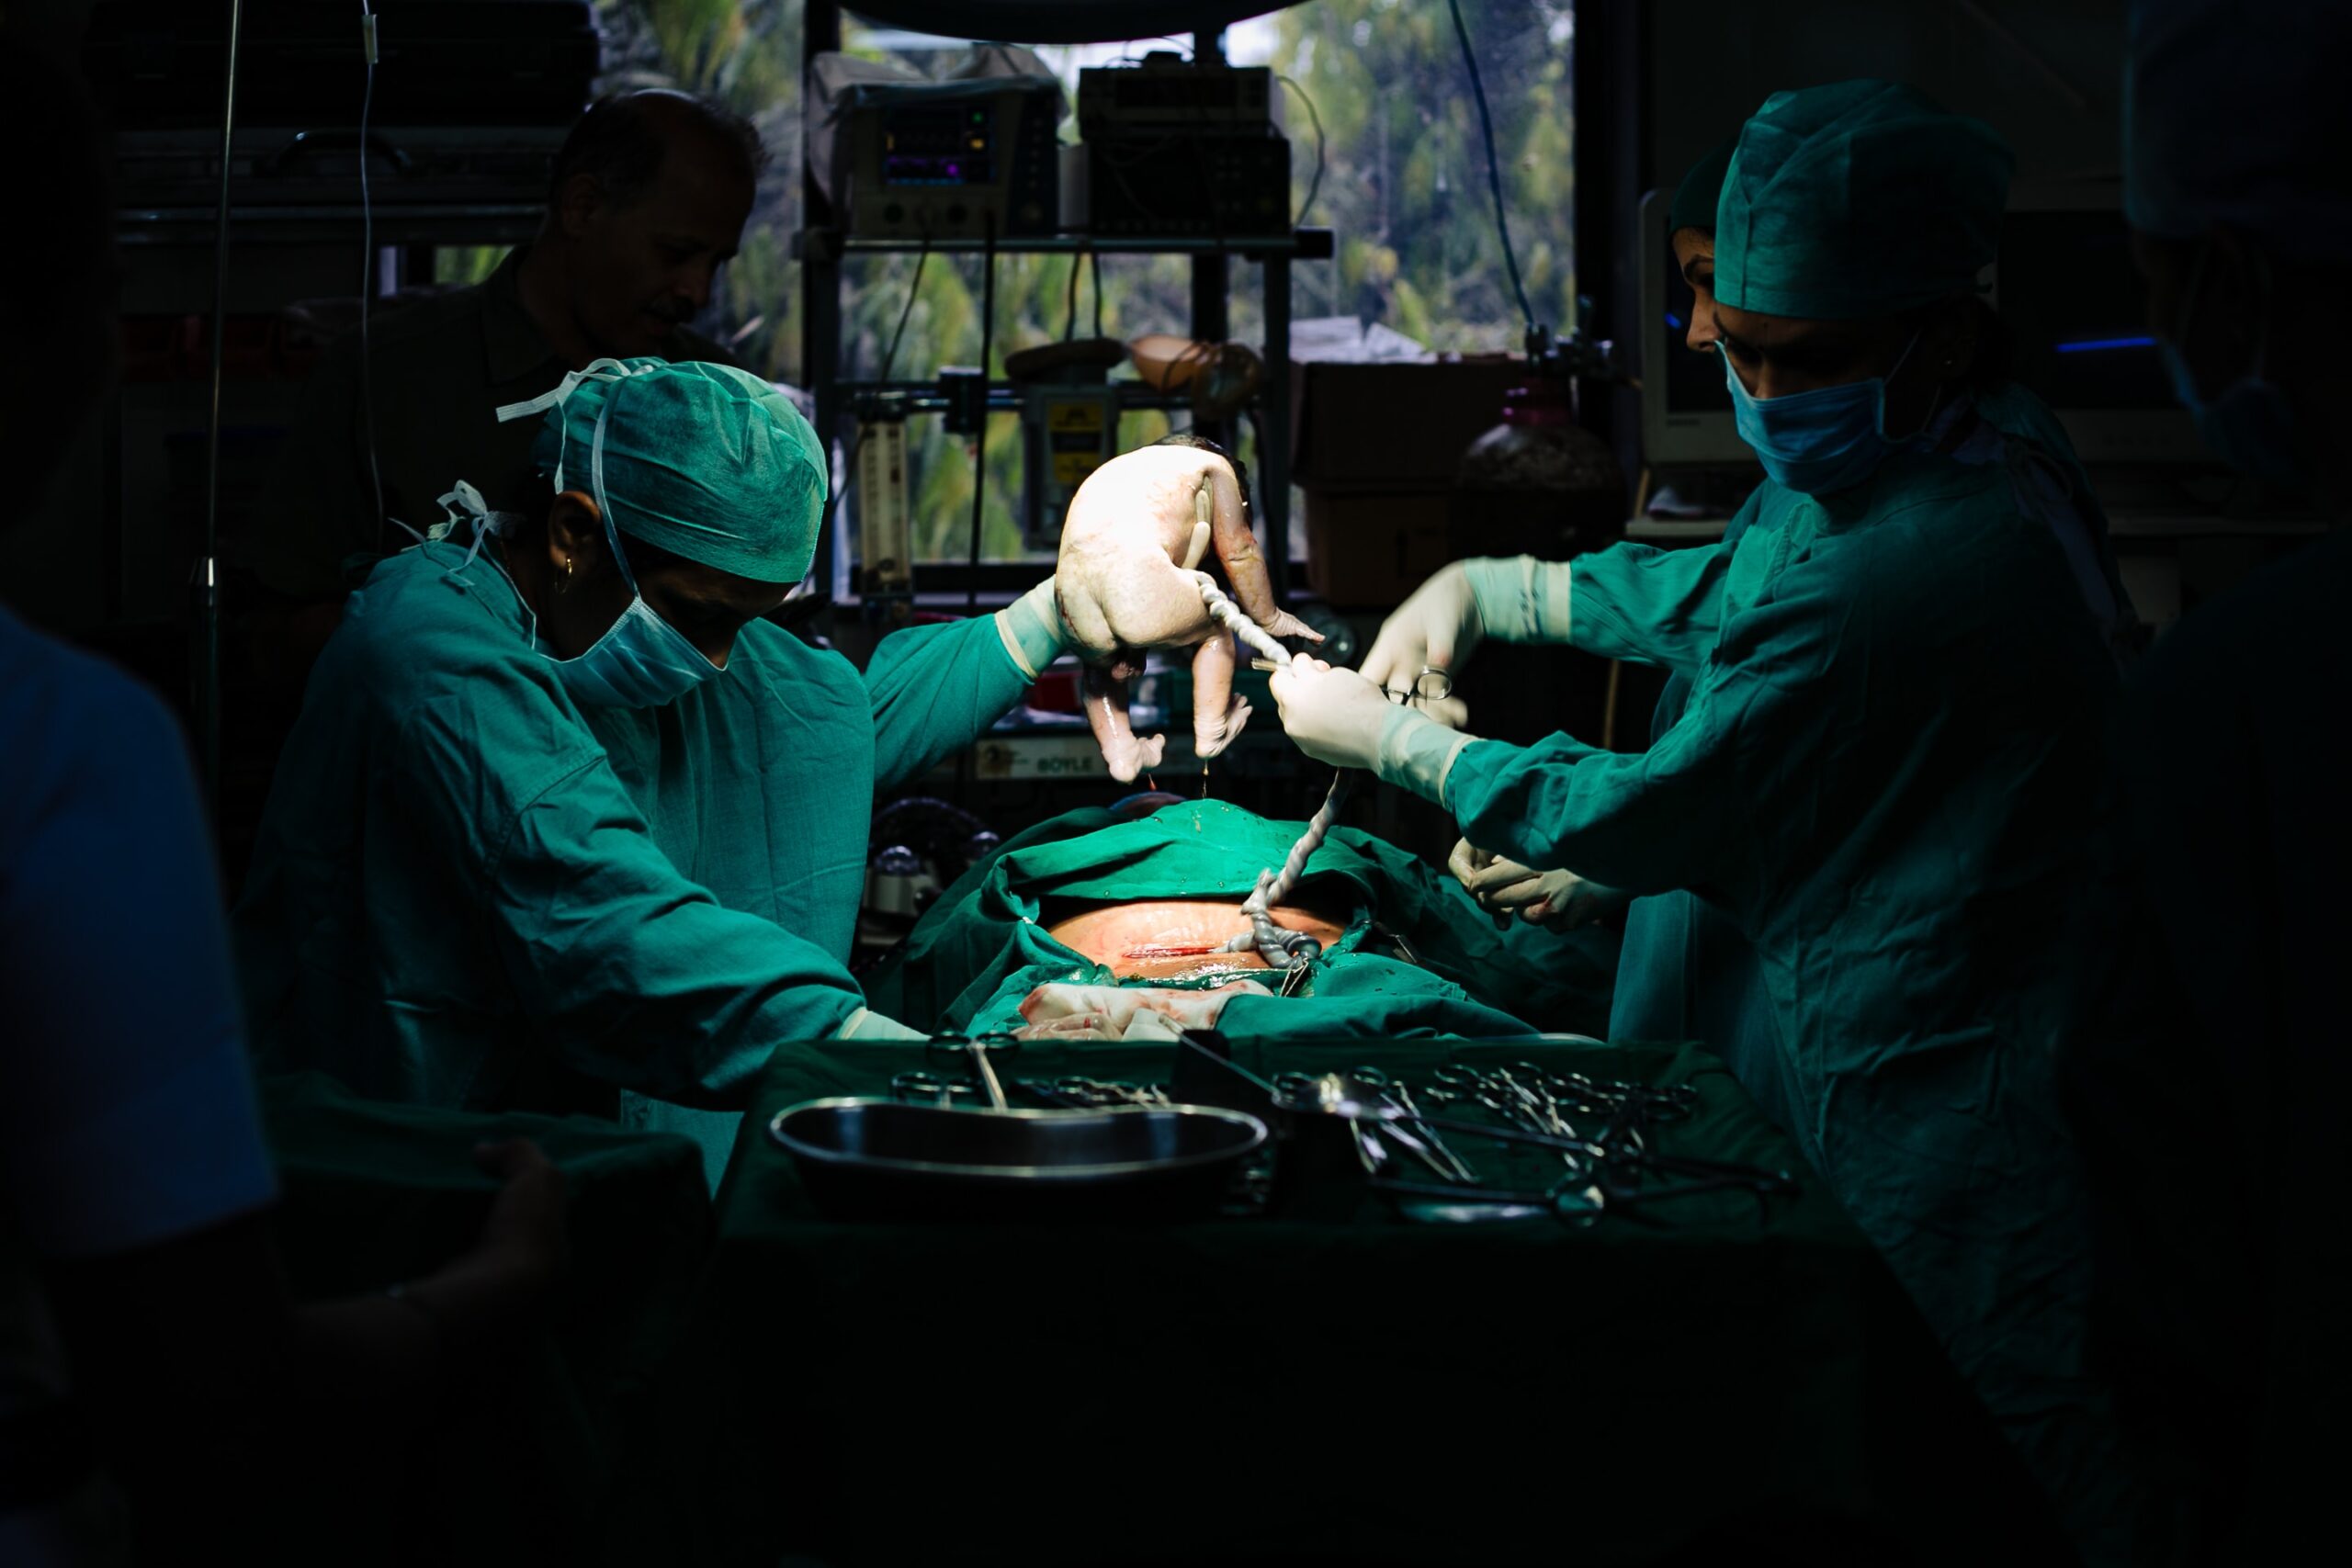 Image Of Baby Being Born In Operating Room By C-section.